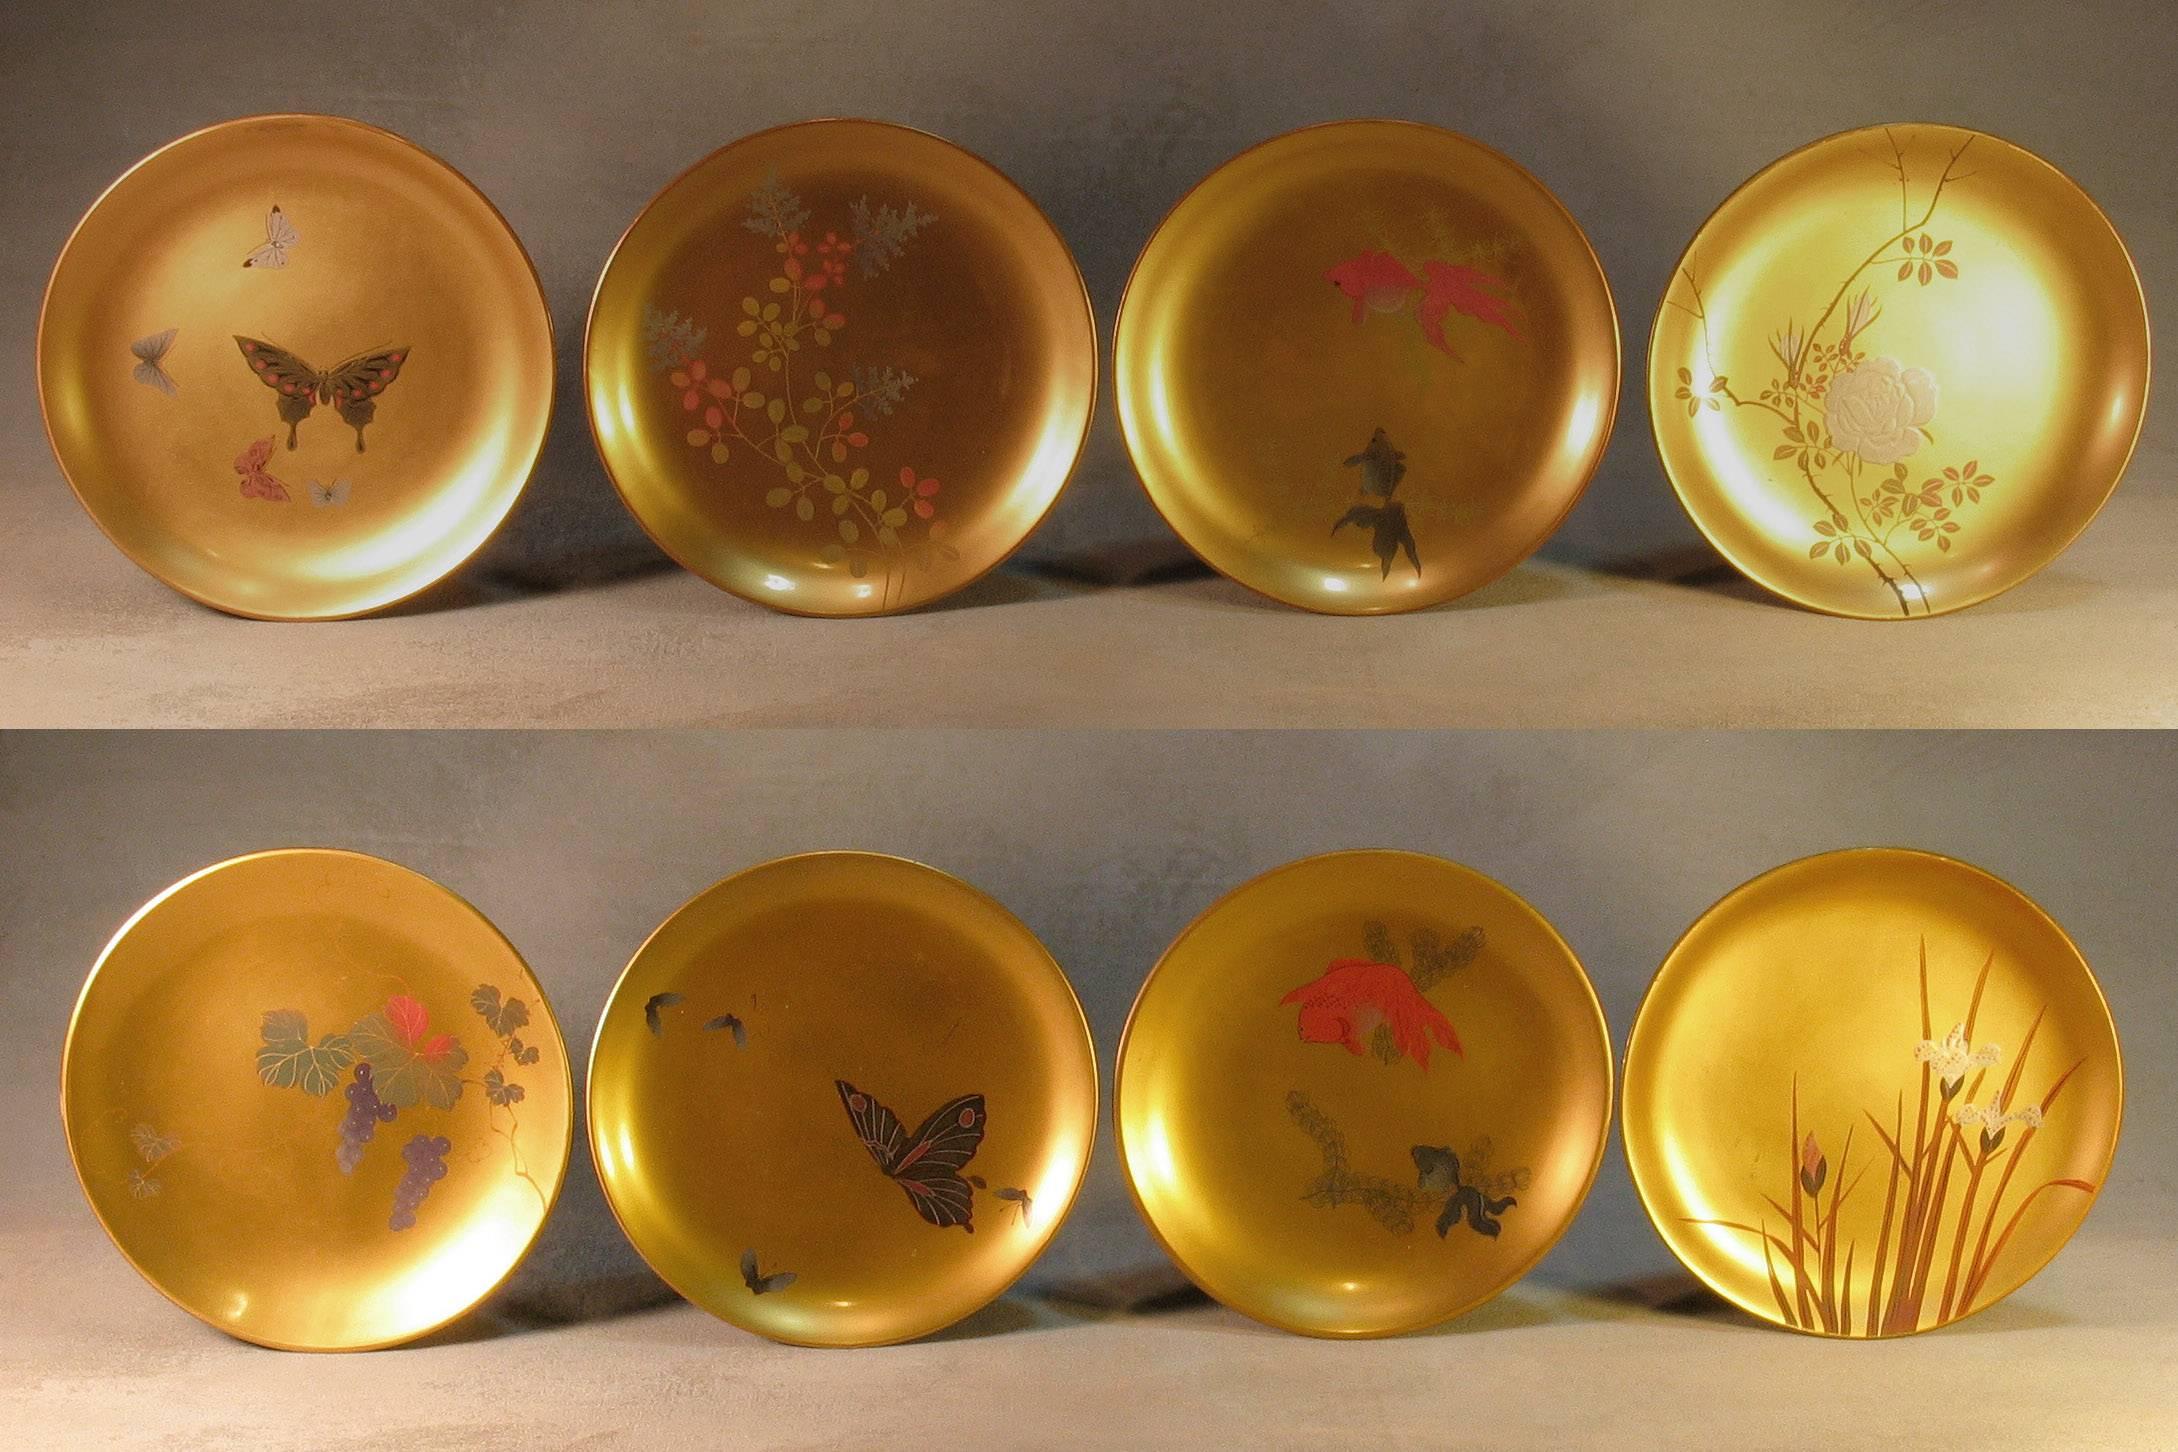 A fine group of eight Japanese lacquer bowls and eight plates, Taisho period, 1912-1926, decorated in a variety of naturalistic designs in takamaki-e lacquer on gold background verso is in a striking Vermillion and black lacquer. The bowls and